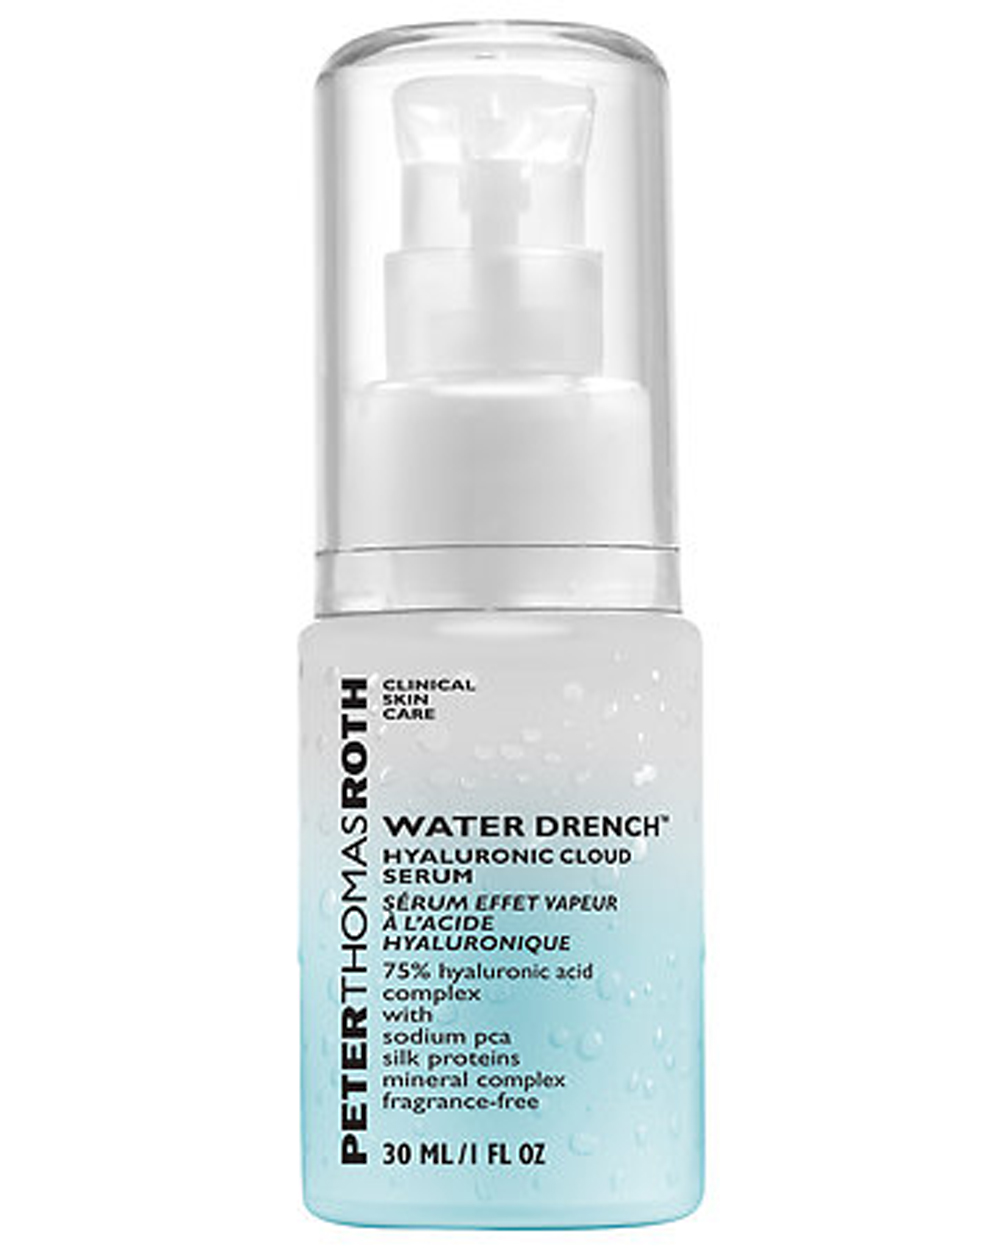 For boosting hydration: Peter Thomas Roth Water Drench Hyaluronic Cloud Serum